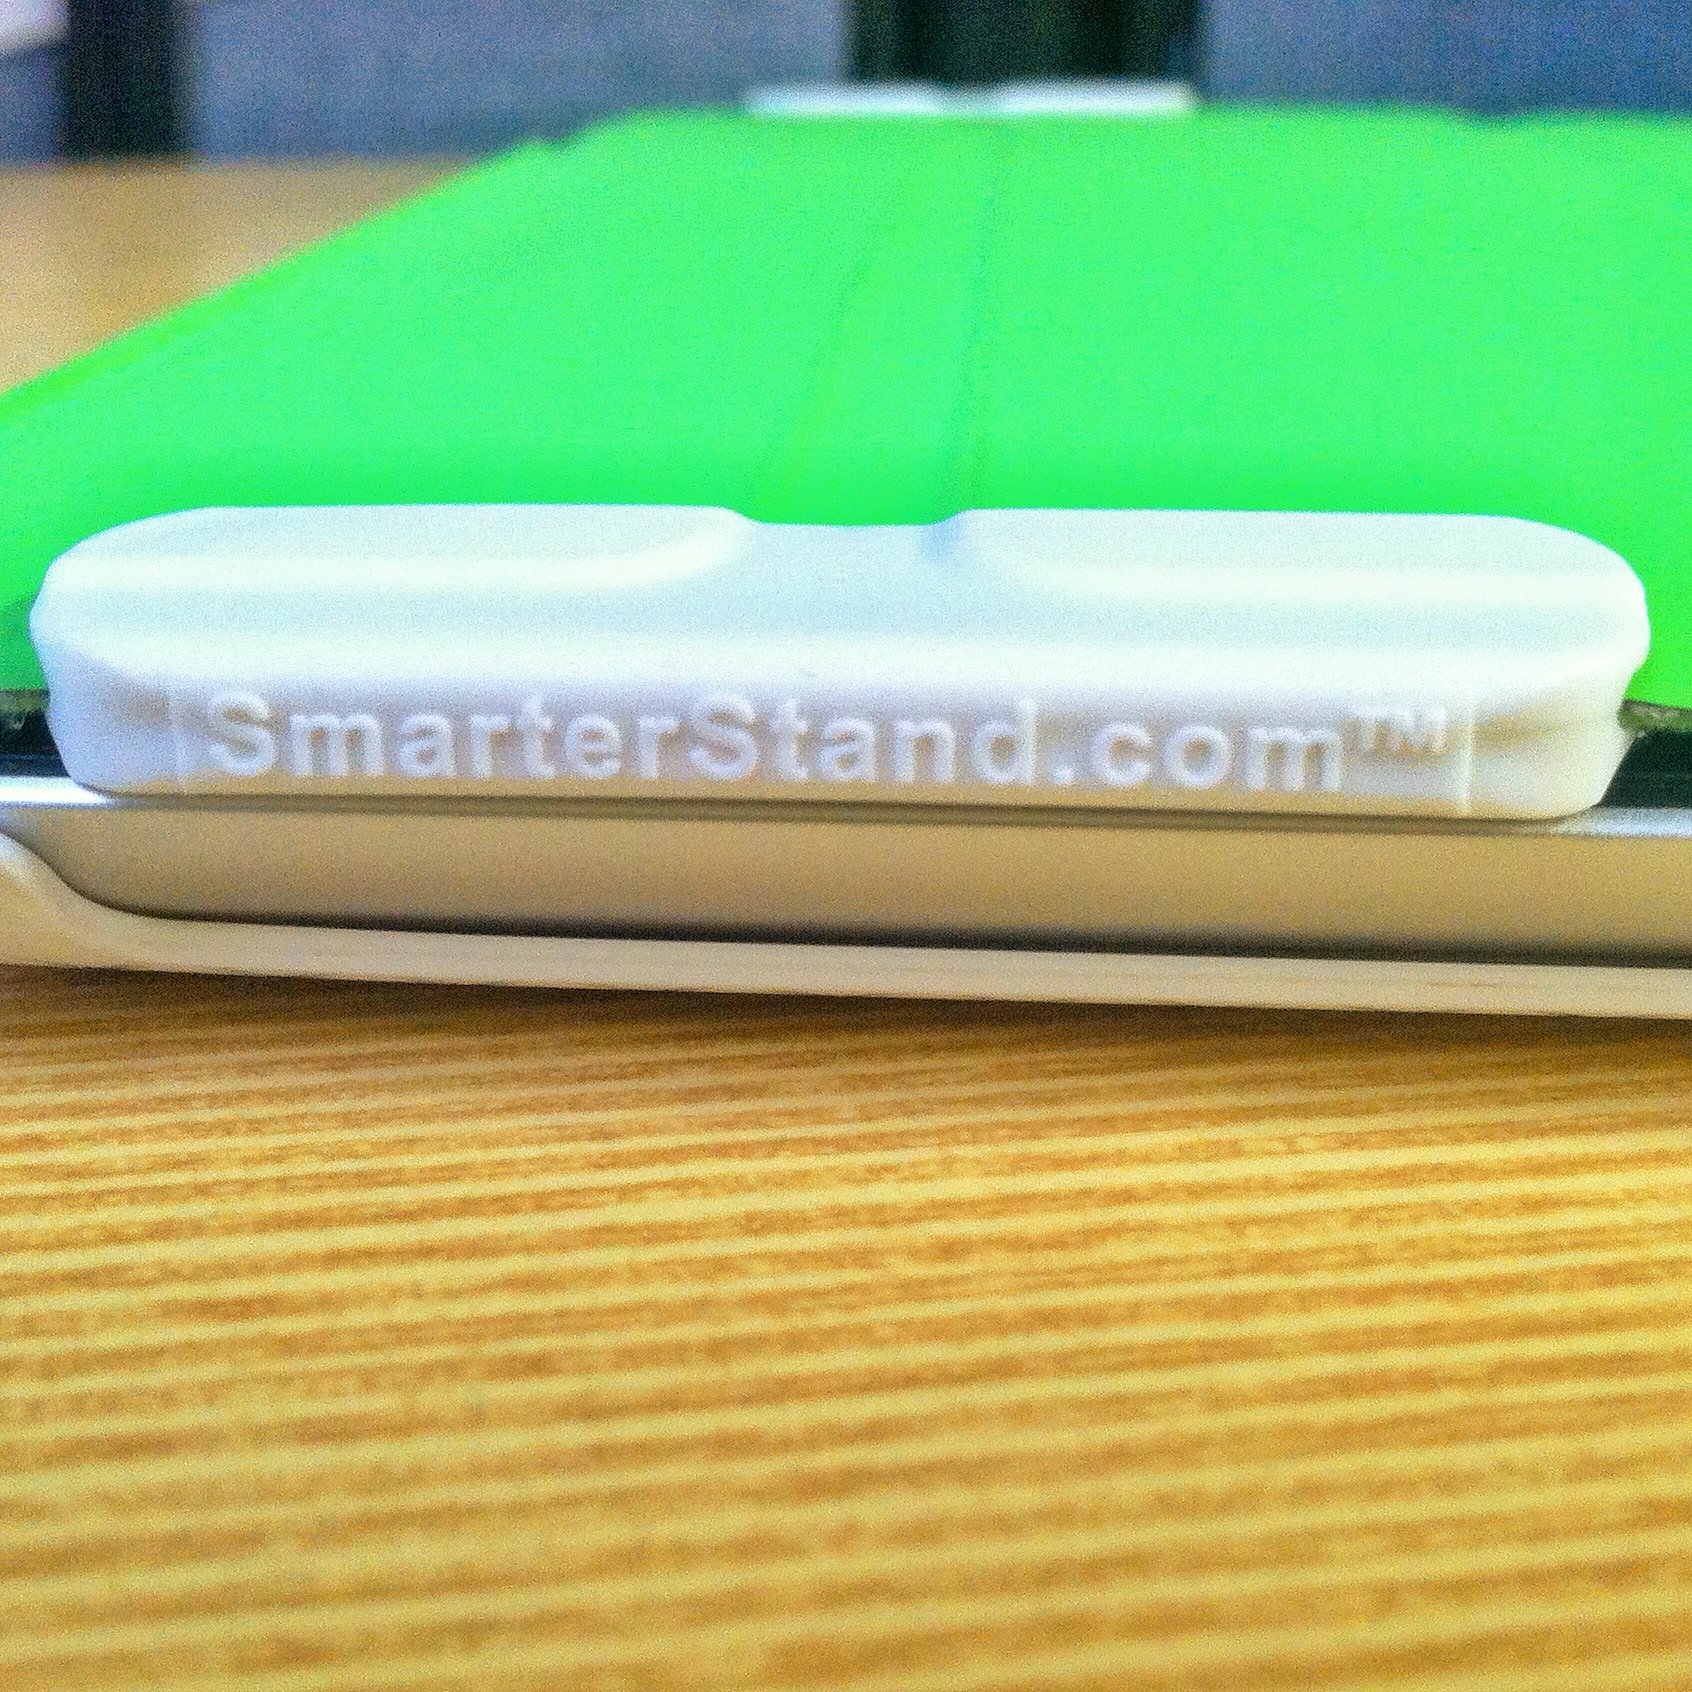 Review: Smarter Stand for iPad – Making the Smart Cover… Smarter